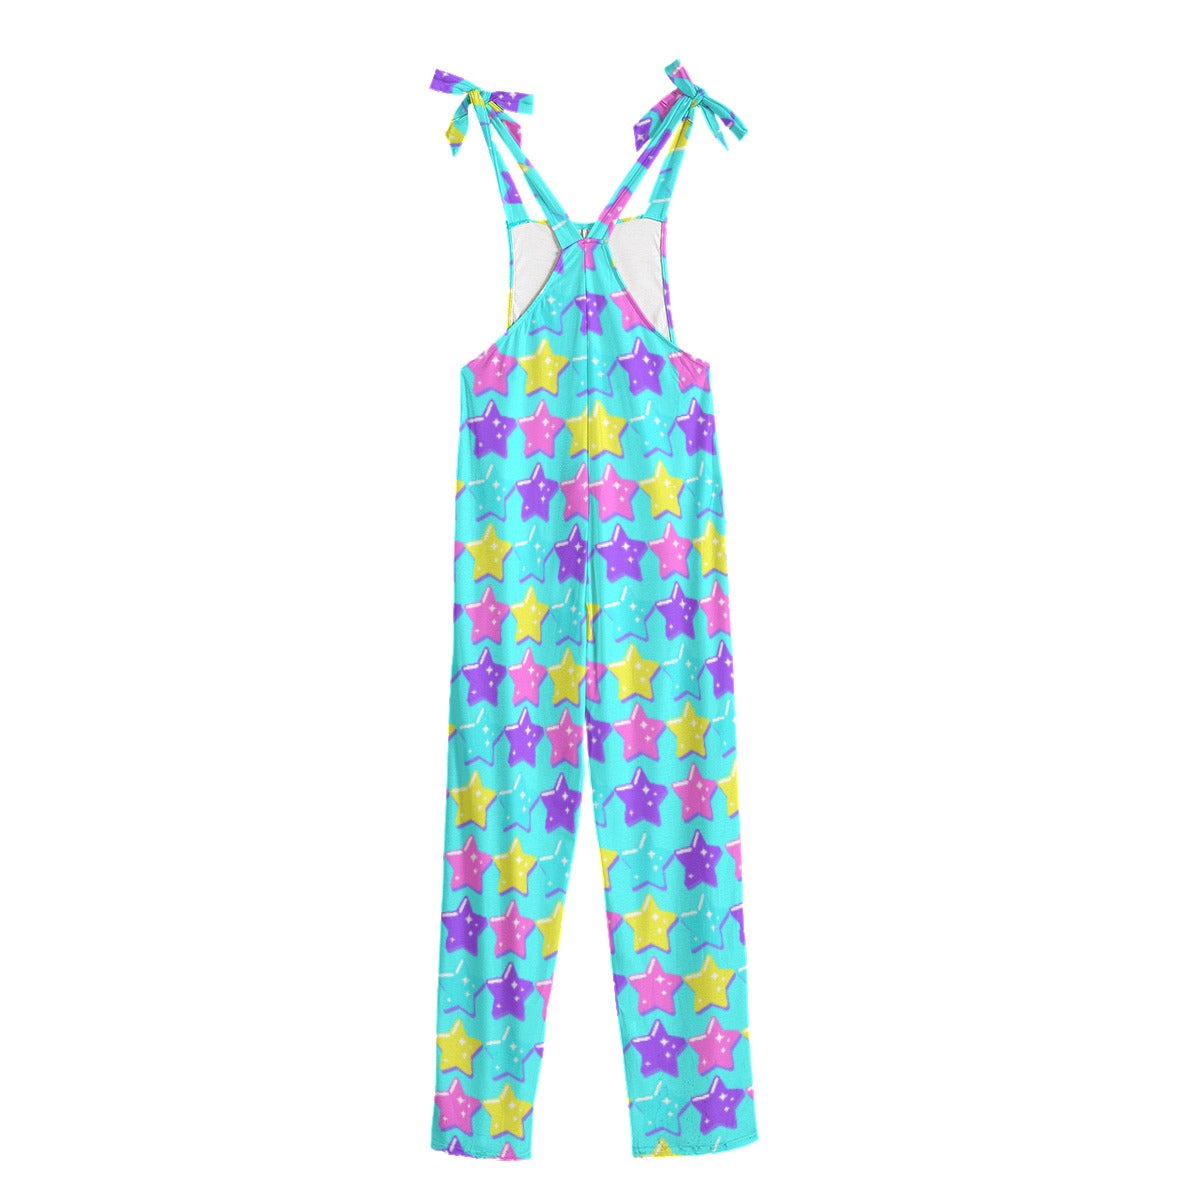 Electric Star Wave Blue Jumpsuit Overalls